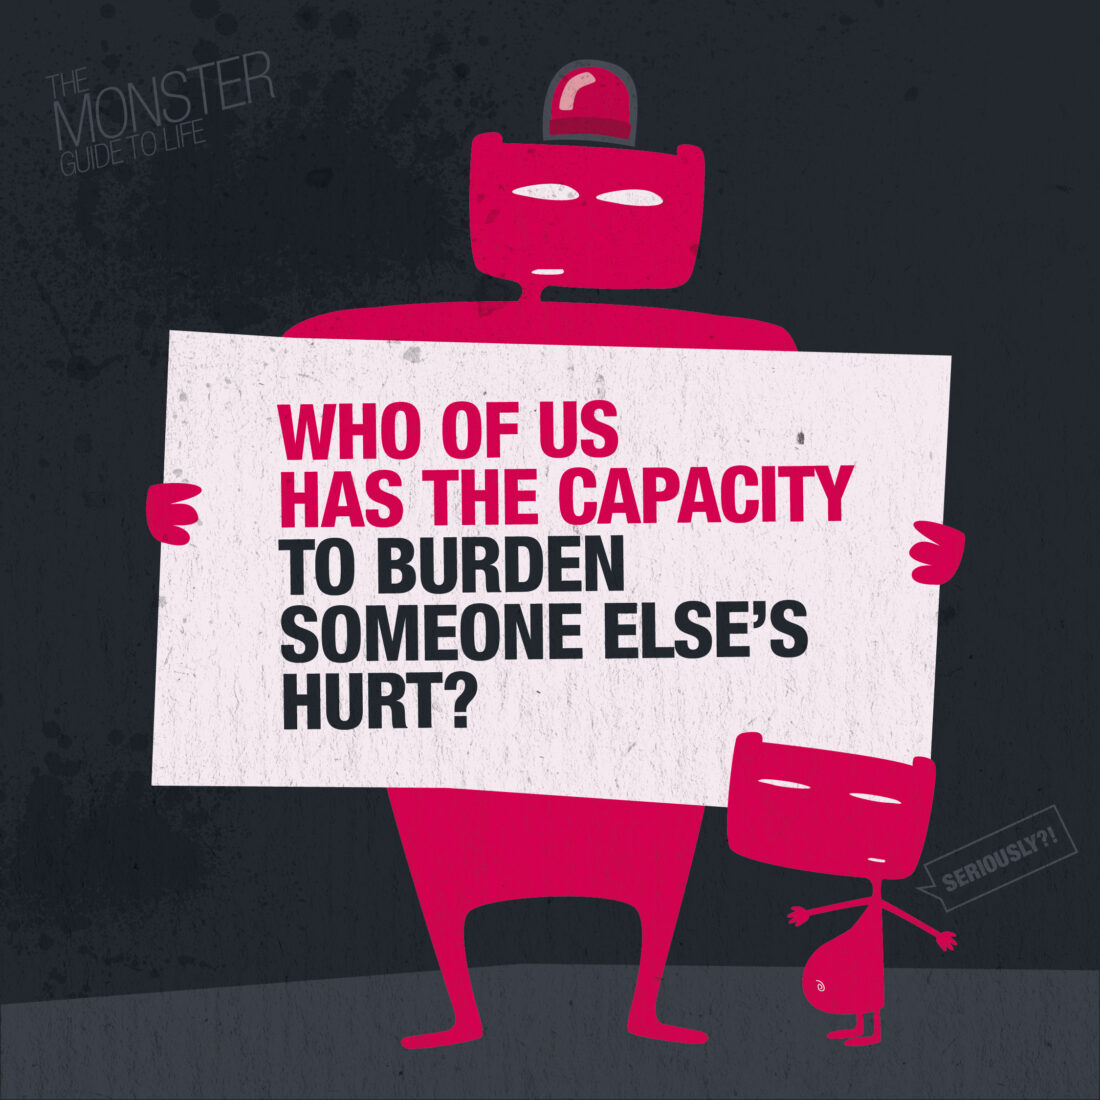 Who of us has the capacity to burden someone else's hurt?